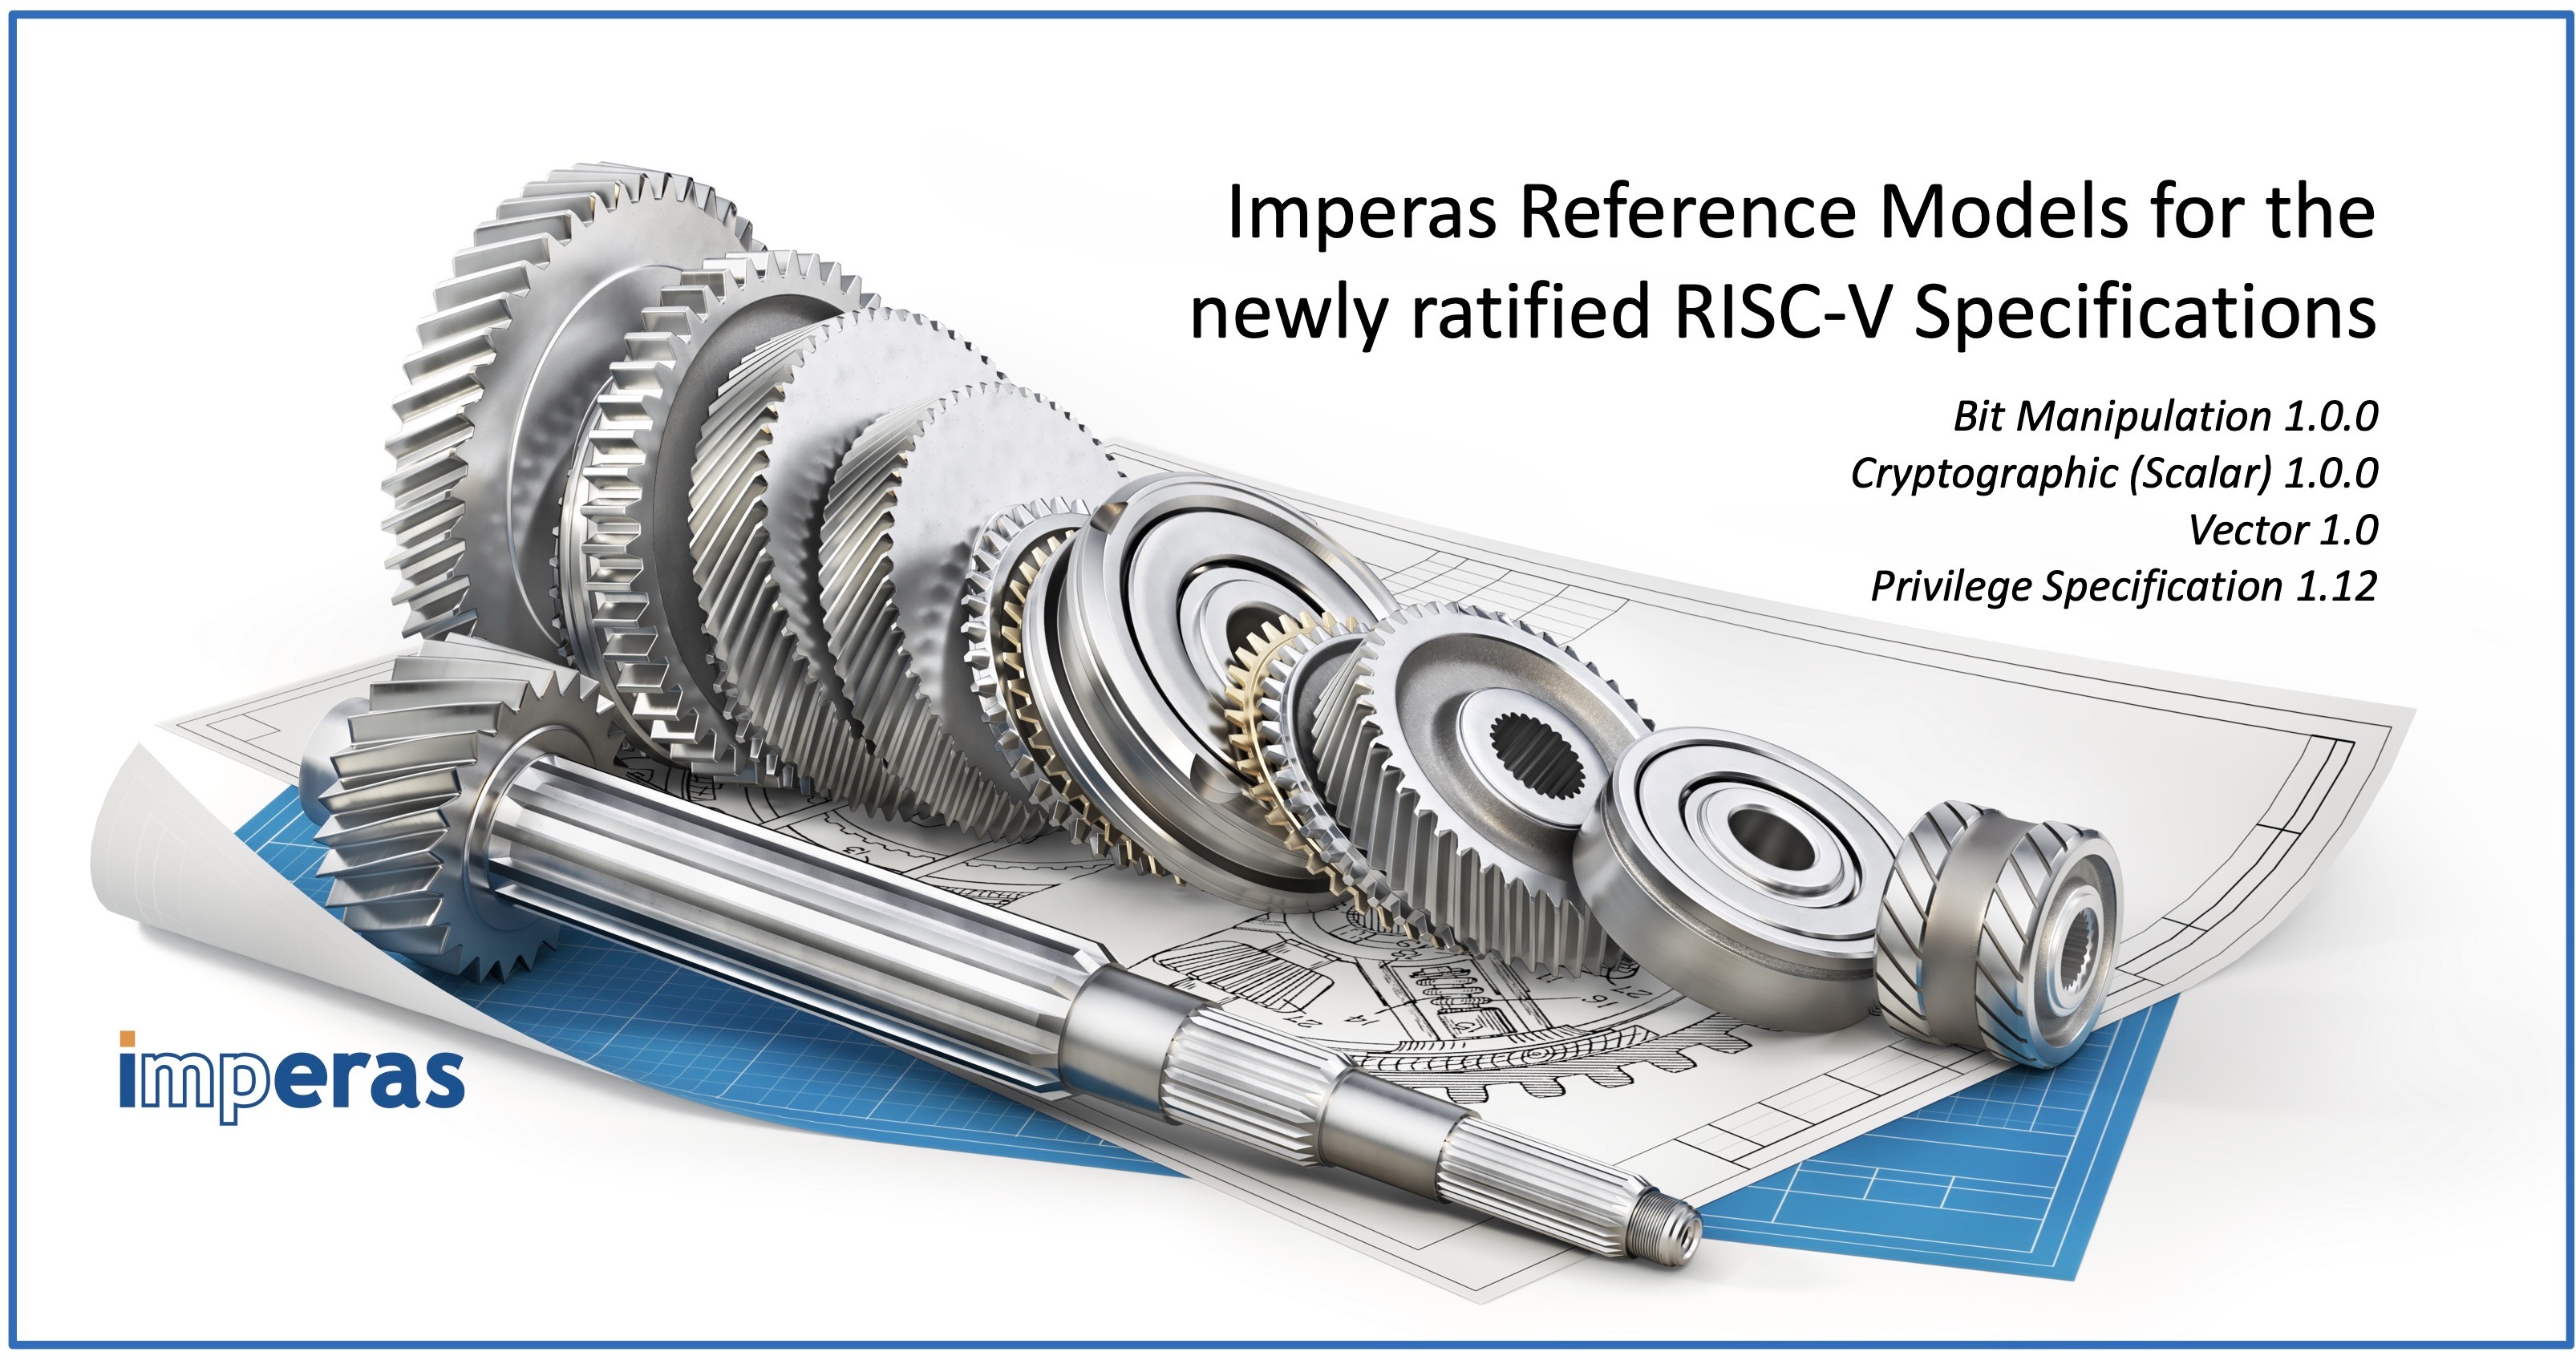 Imperas RISC-V Reference Models for latest ratified specifications